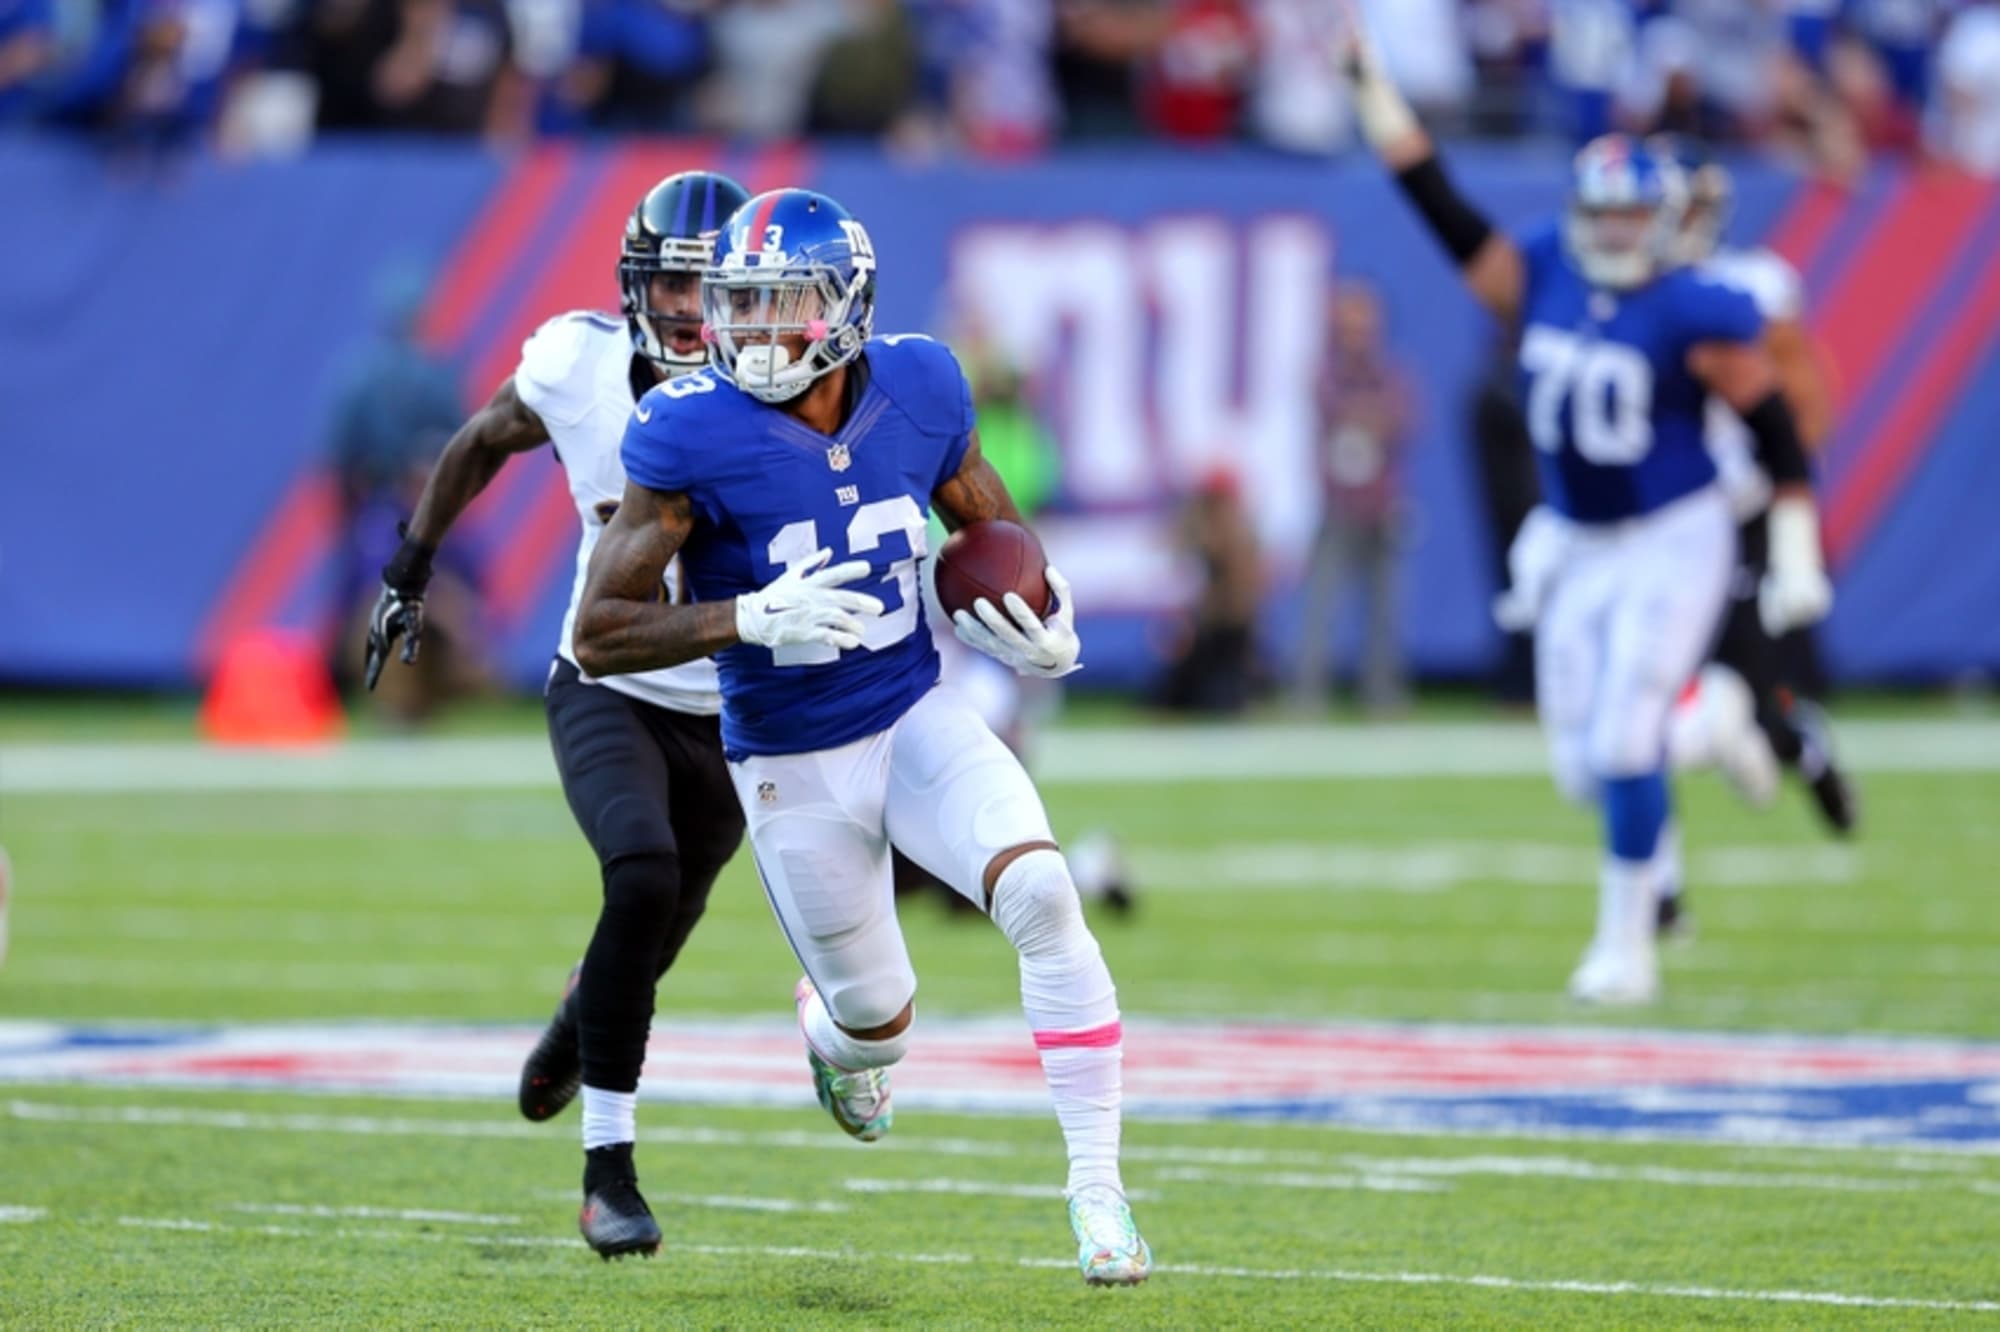 The New York Giants Have the Potential to Make a Playoff Run